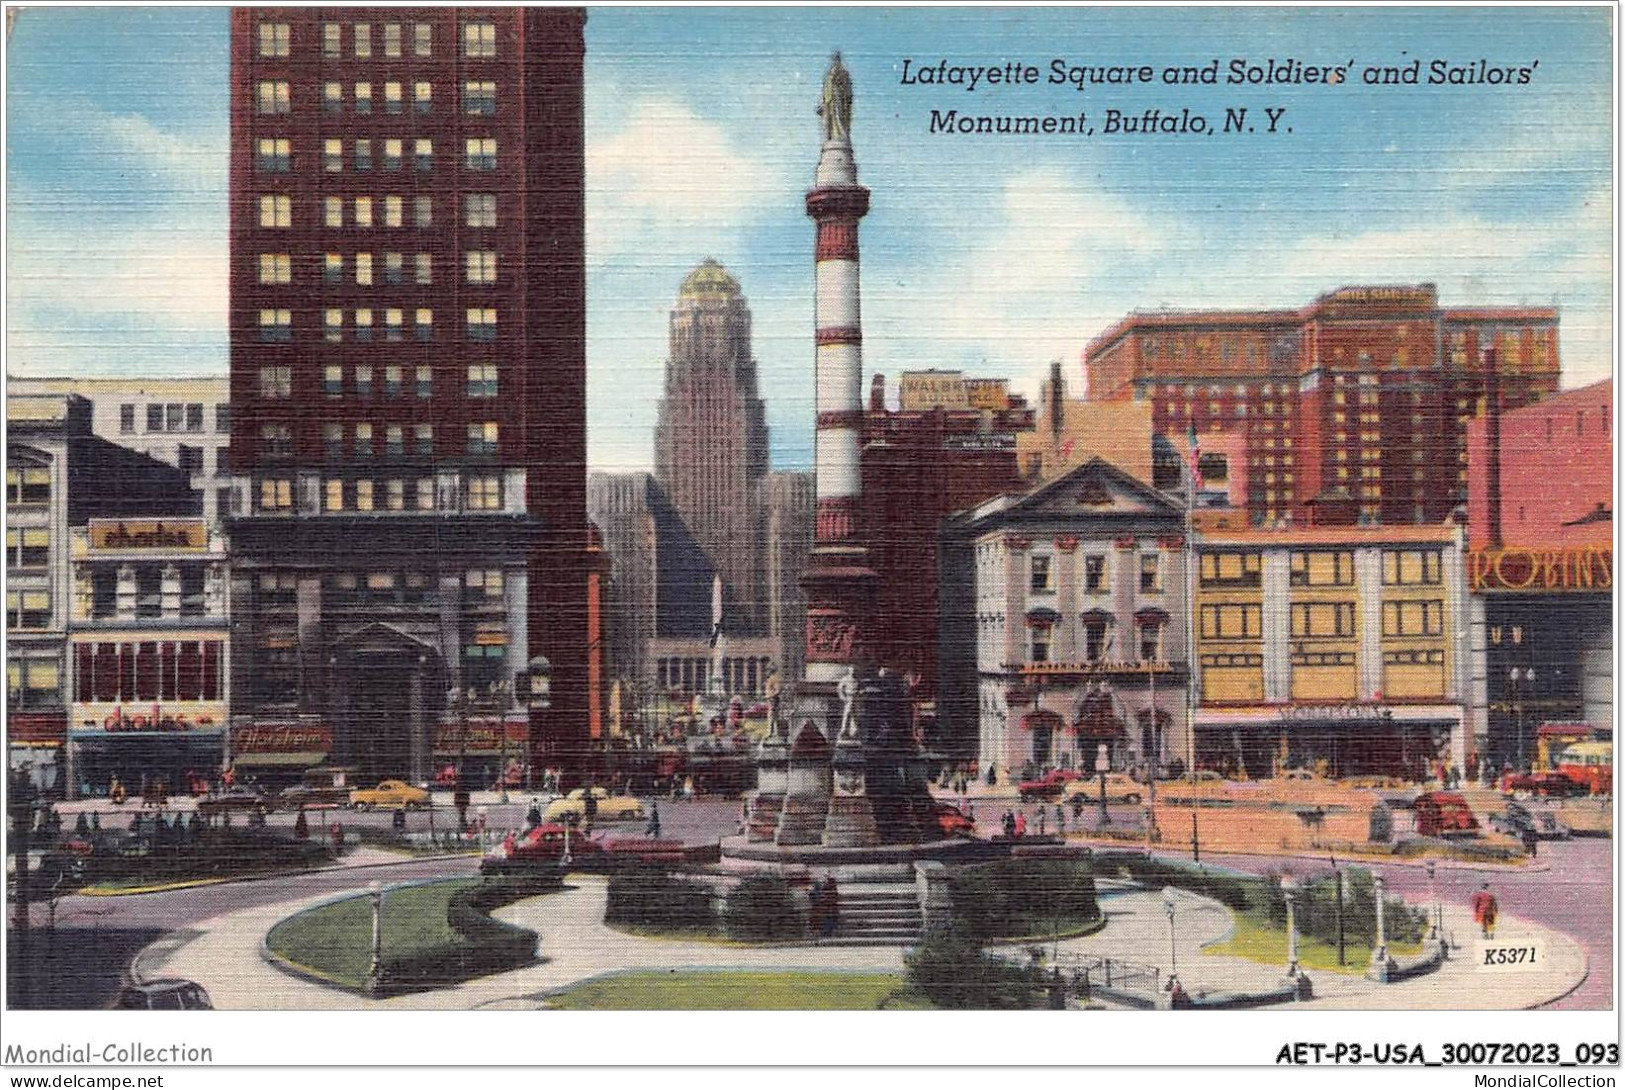 AETP3-USA-0235 - NEW YORK - Lafayette Square And Soldier's And Sailors Monument - Buffalo - Andere Monumente & Gebäude